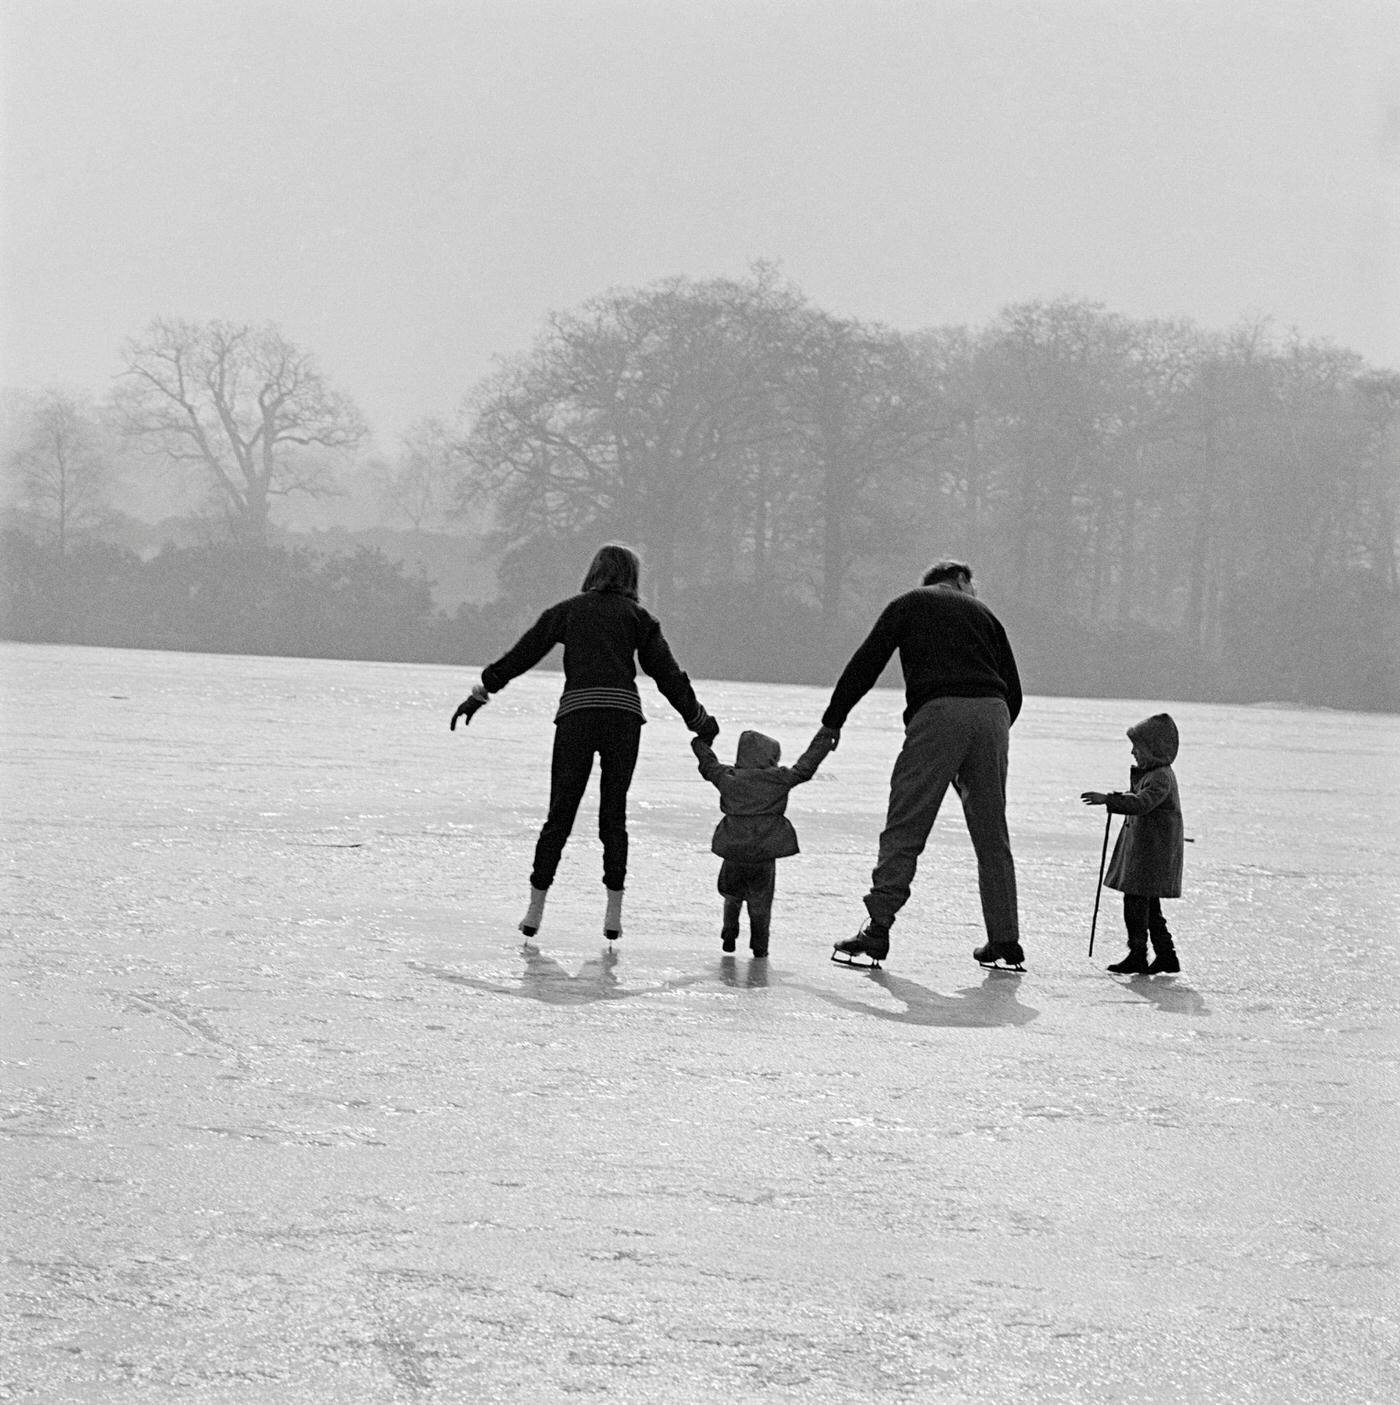 Skating in Richmond Park, London, 1962. A man and woman on skates helping two small children to walk on the ice on a pond or lake in Richmond Park in winter.